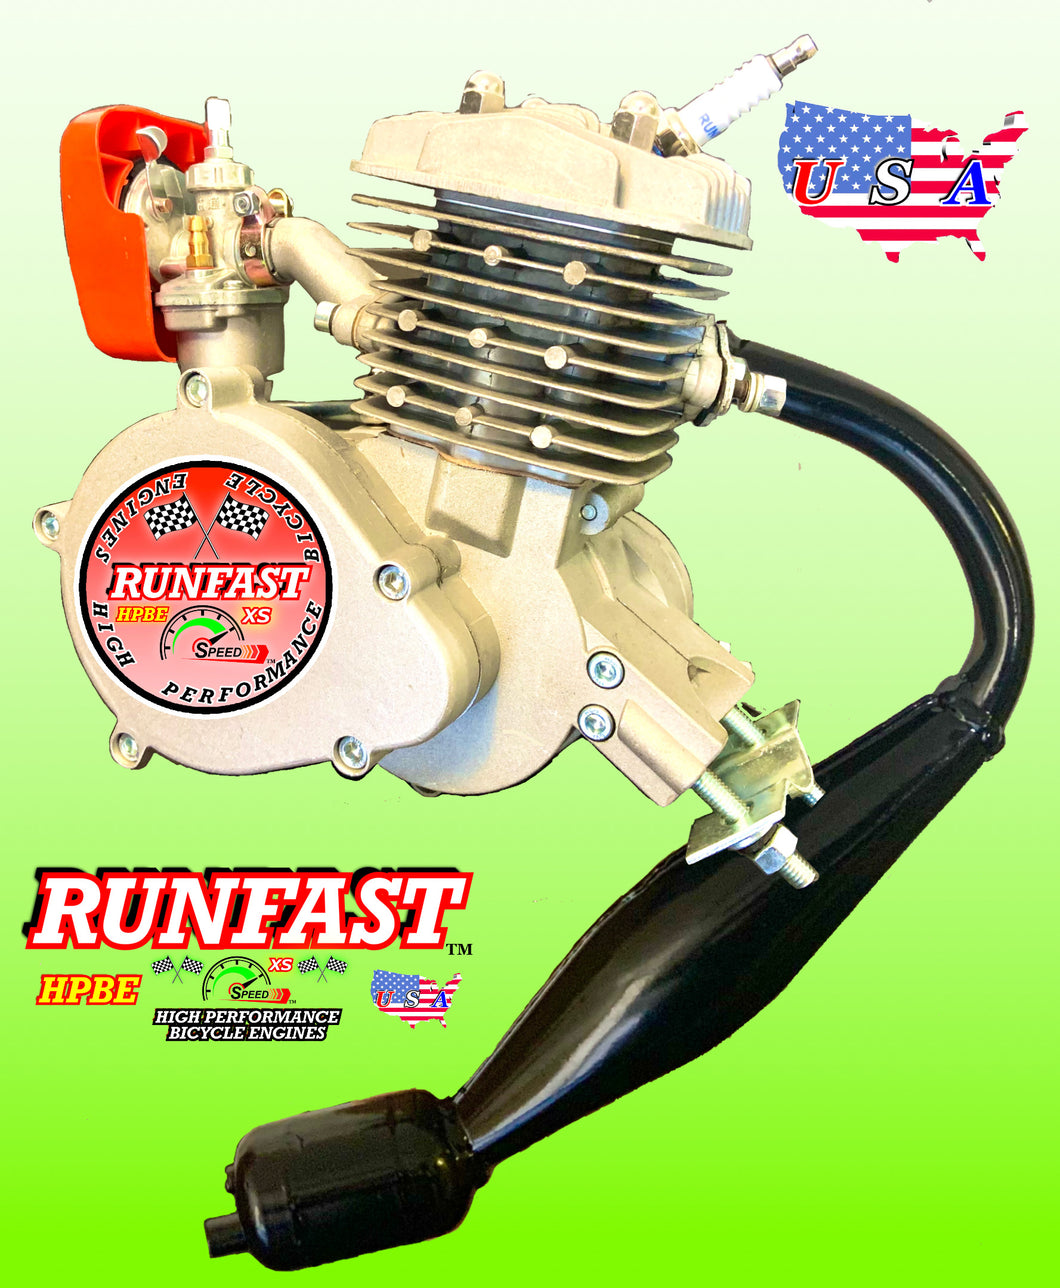 MONSTER RUNFAST TM 2-stroke 66cc/80cc SUPERPOWER Motorized Bike ENGINE FOR MOTORIZED BICYCLE With Hypermaxx Power Super Pipe and Speed Carburetor